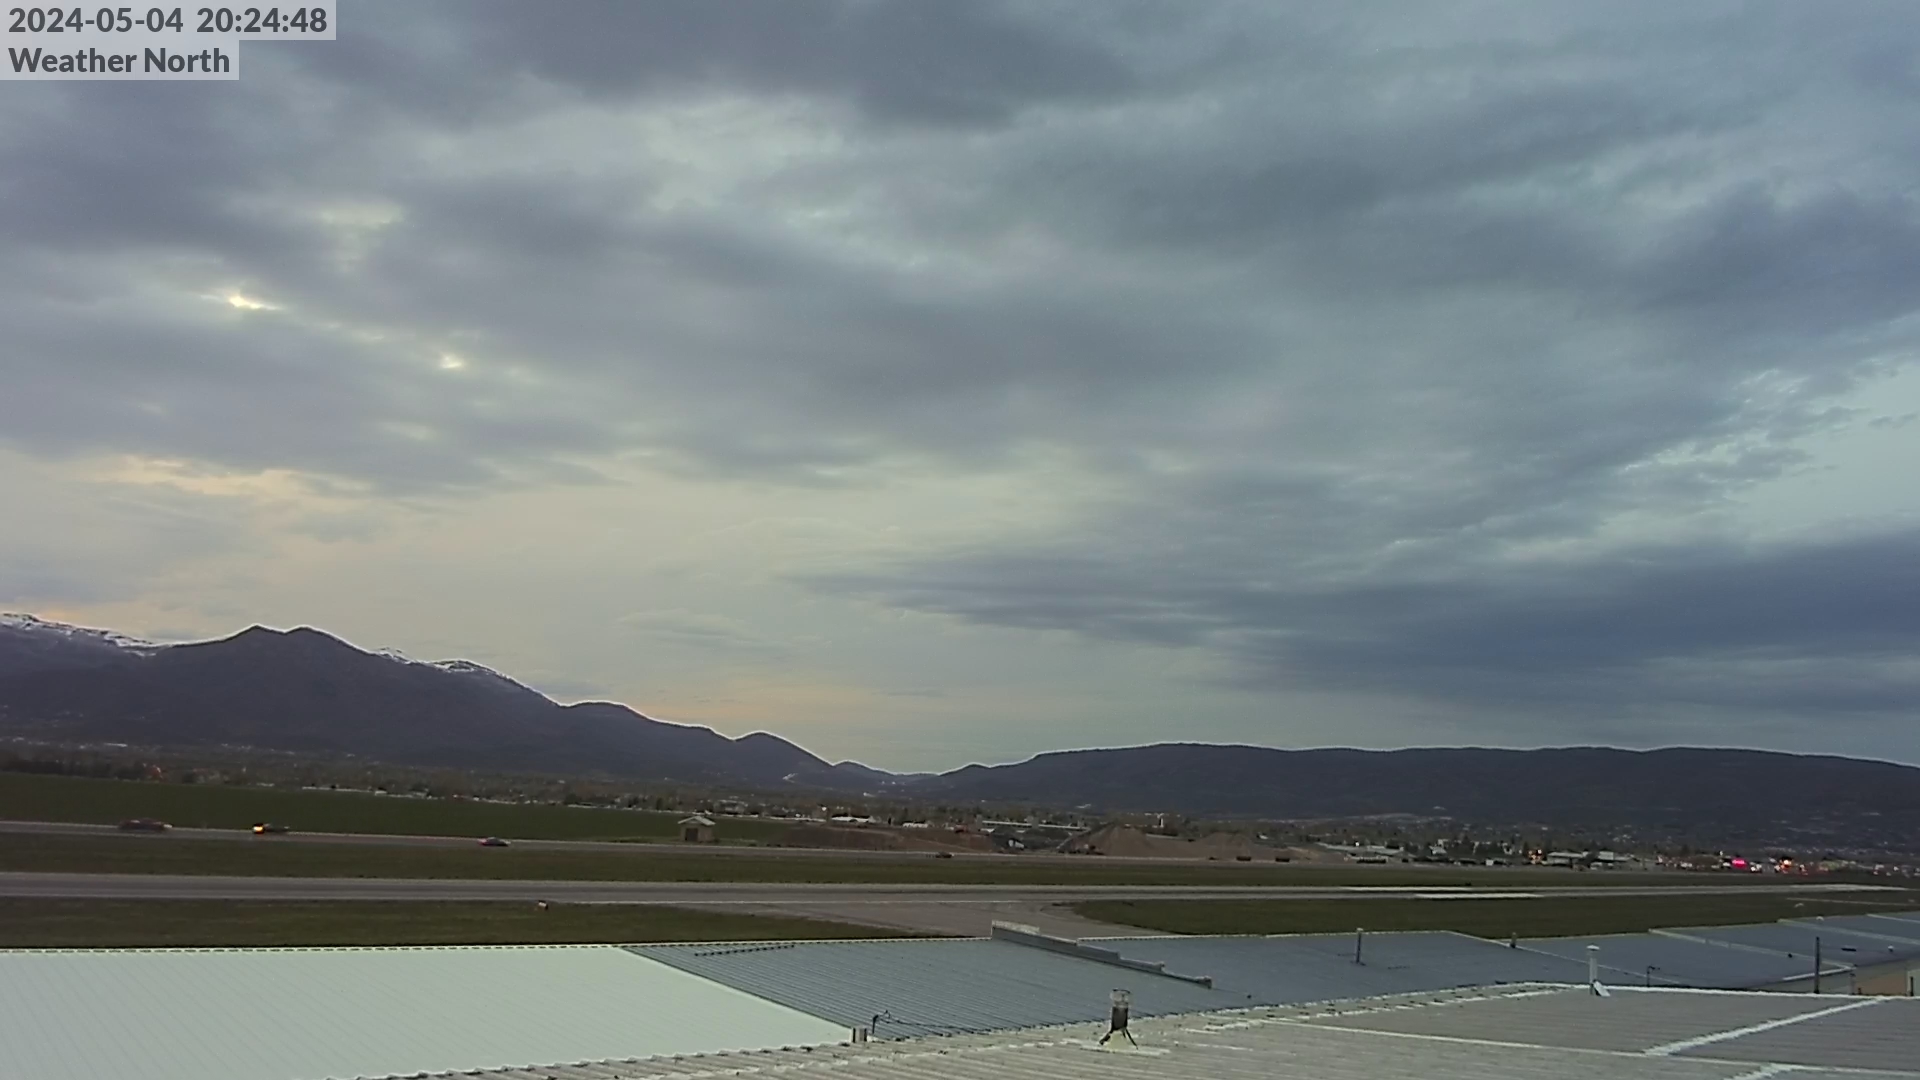 Weather North View, Real Time Airport Camera